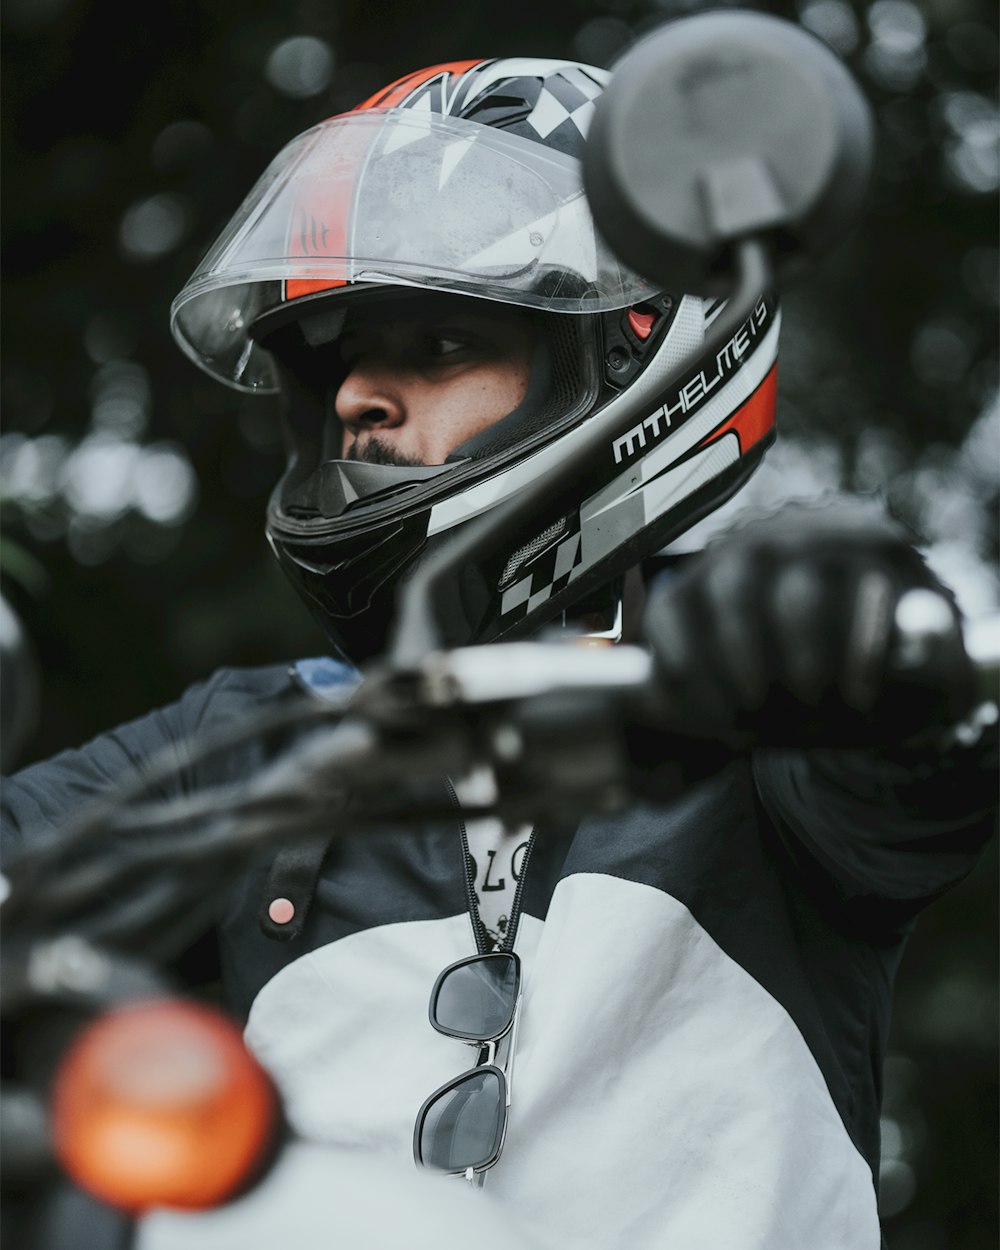 a man wearing a helmet and holding onto a motorcycle